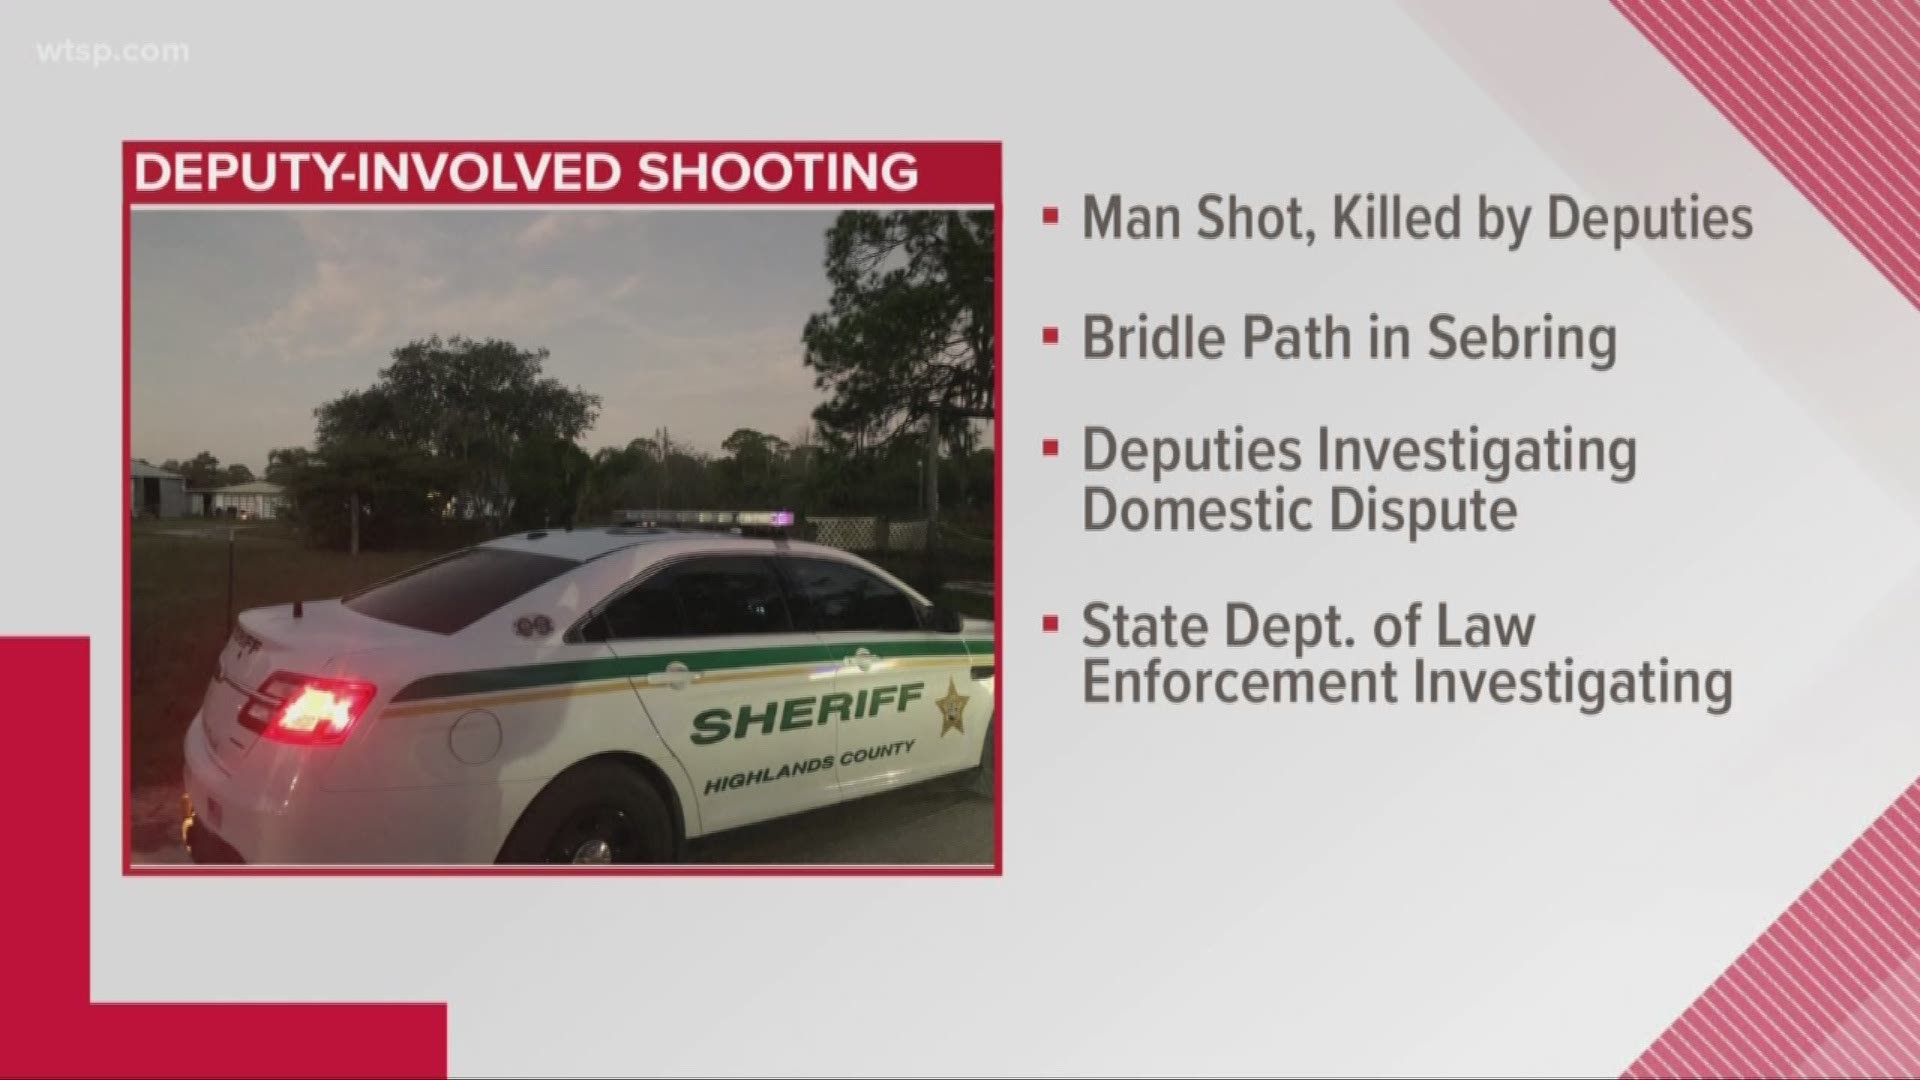 A man with a weapon was shot and killed early Sunday by Highlands County Sheriff's Office deputies.